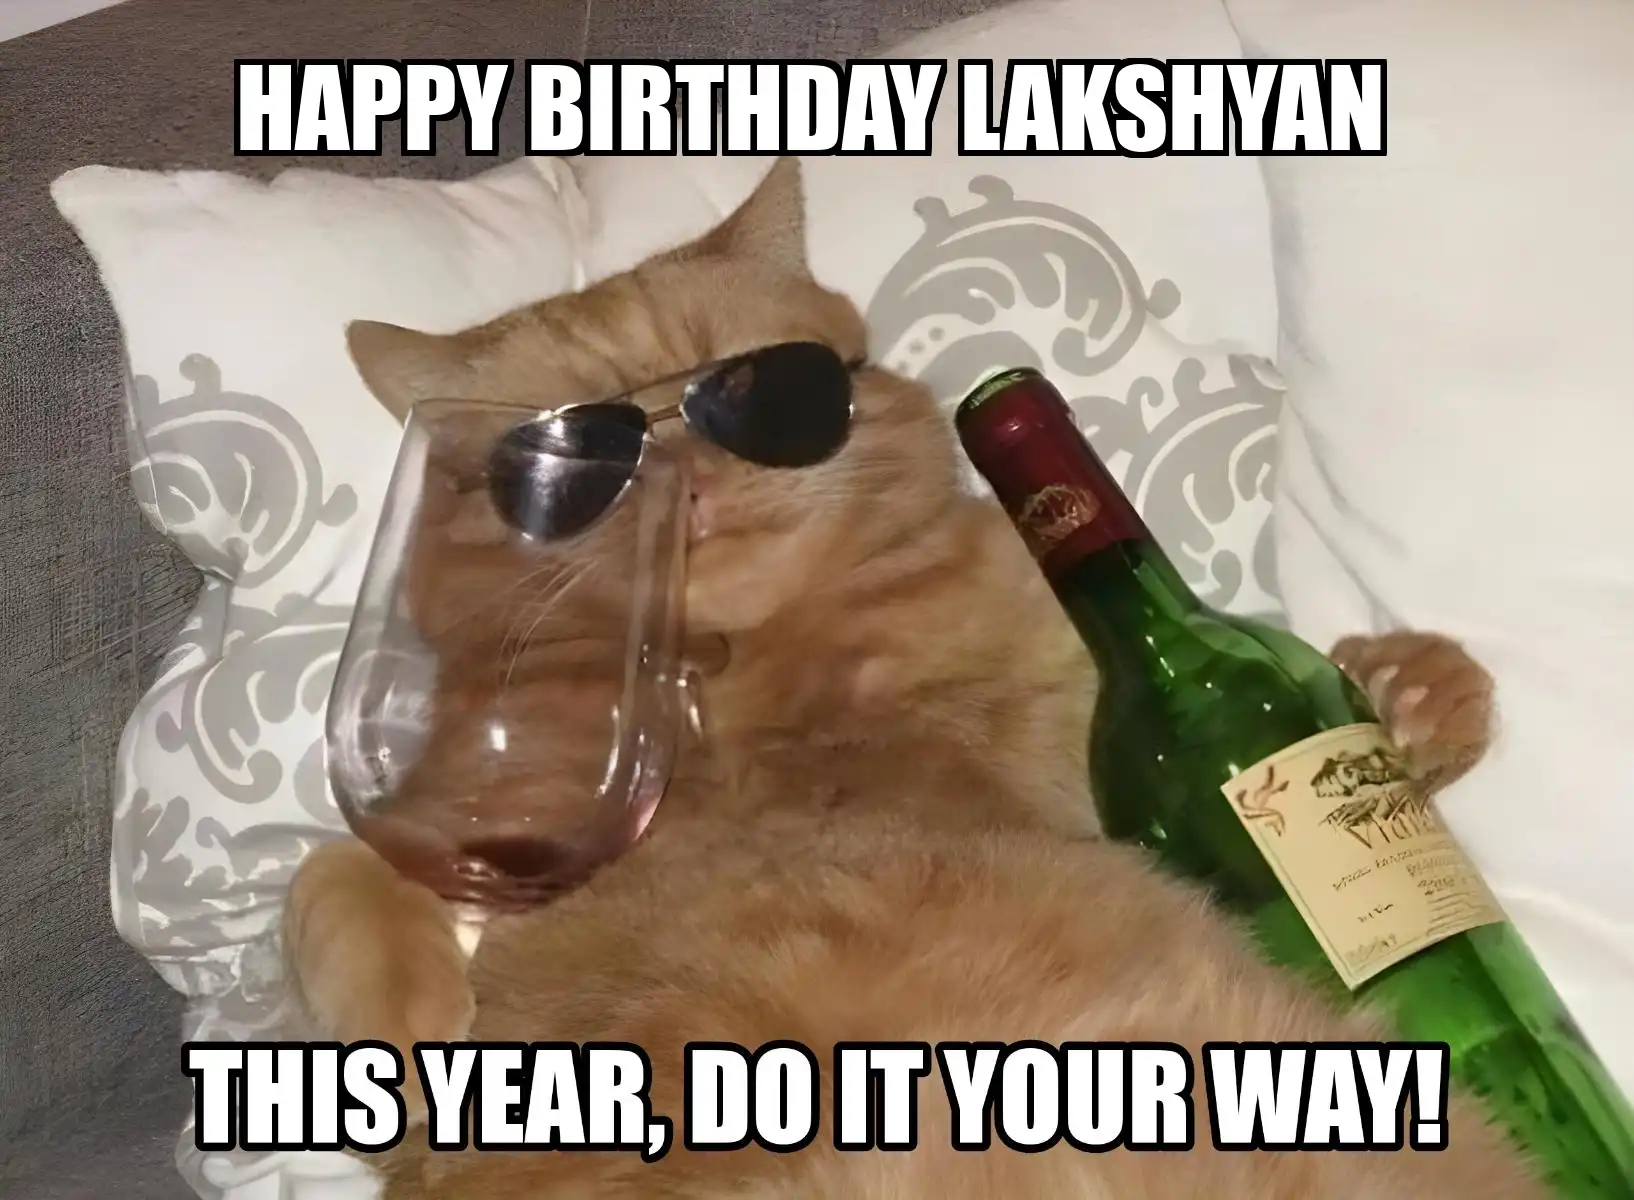 Happy Birthday Lakshyan This Year Do It Your Way Meme